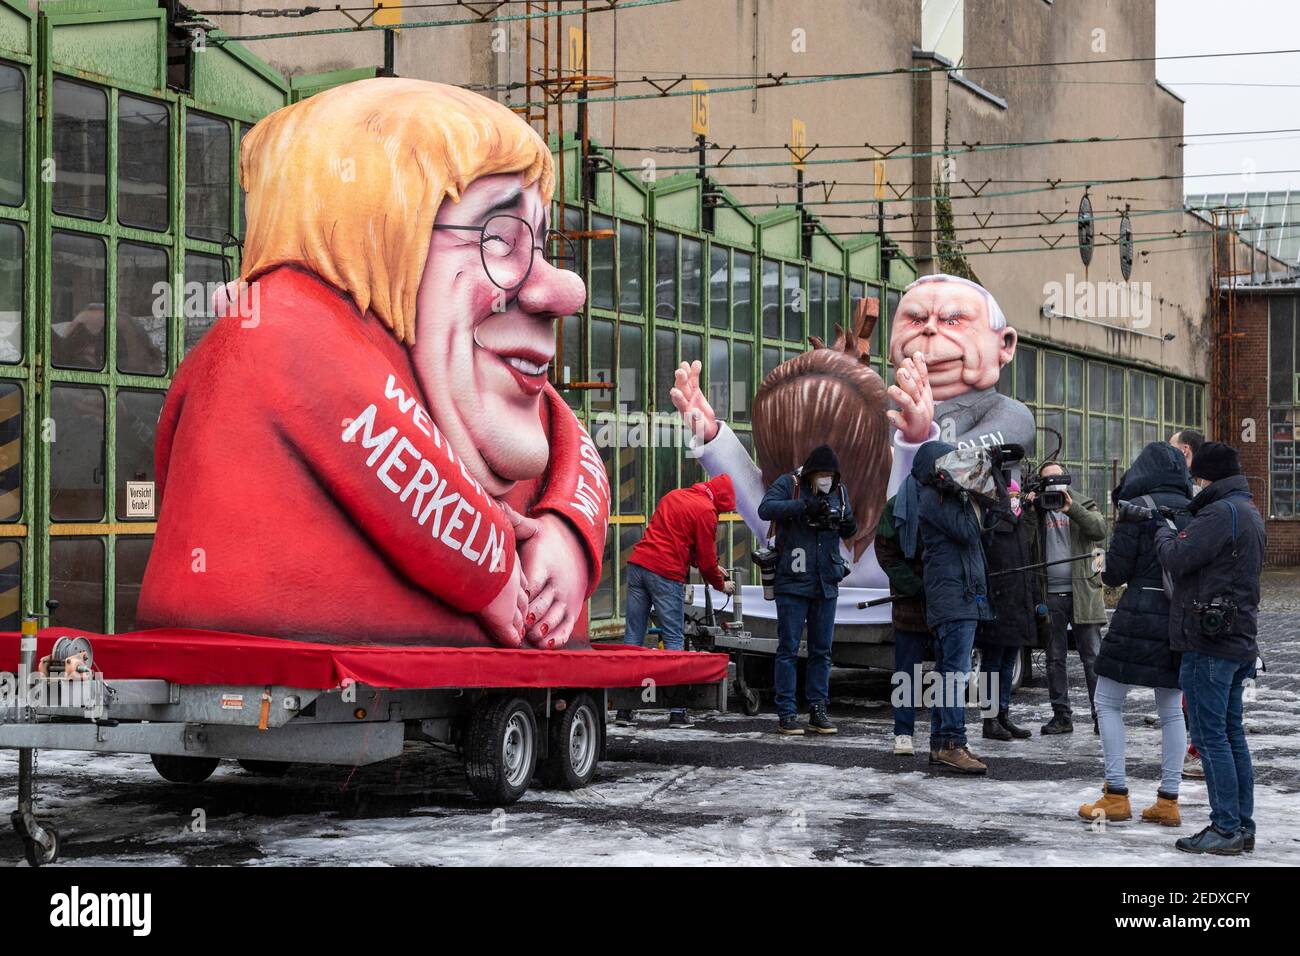 Dusseldorf, Germany. 15 February 2021. Effigy of German politician Armin Laschet who might replace Angela Merkel in the next general election. Carnival floats created by German artist Jacques Tilly were presented and later exhibited throughout Dusseldorf as the main carnival parade was cancelled due to the coronavirus pandemic. Credit: Bettina Strenske/Alamy Live News Stock Photo